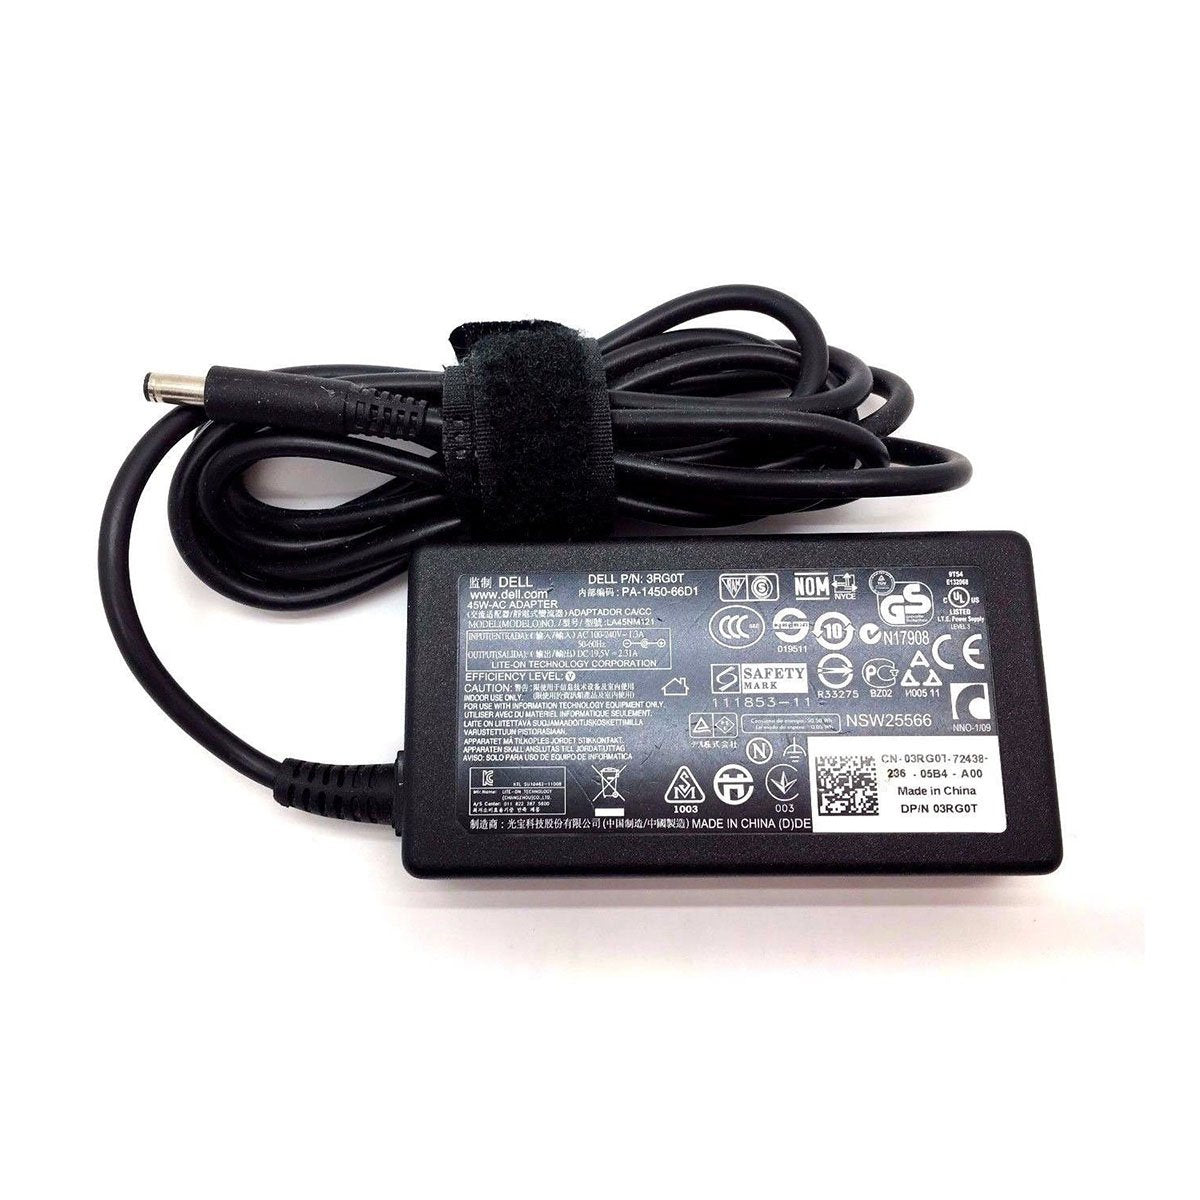 Dell XPS 11 9P33 Original 45W Laptop Charger Adapter With Power Cord 19.5V 4.5mm Pin